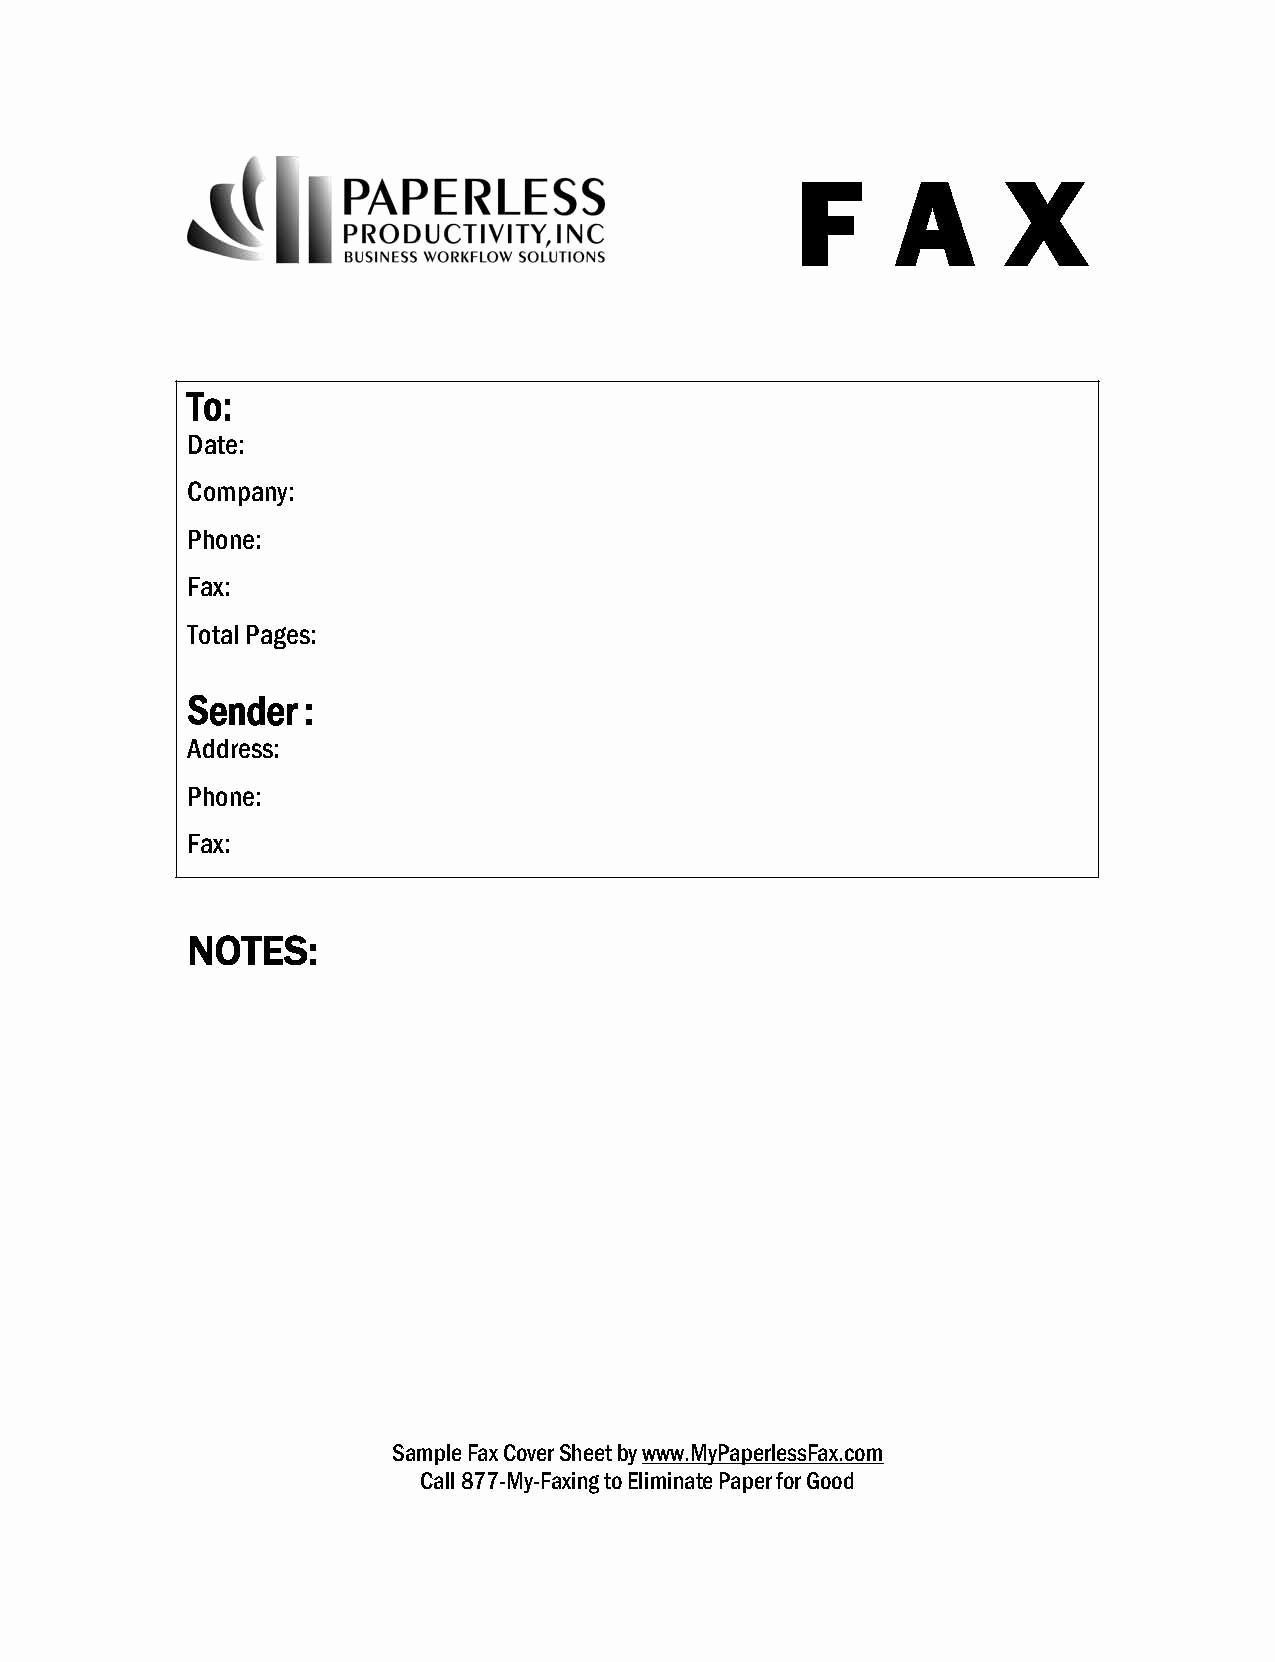 Sample Of Fax Cover Sheets Beautiful Blank Fax Cover Letter 2016 Samplebusinessresume